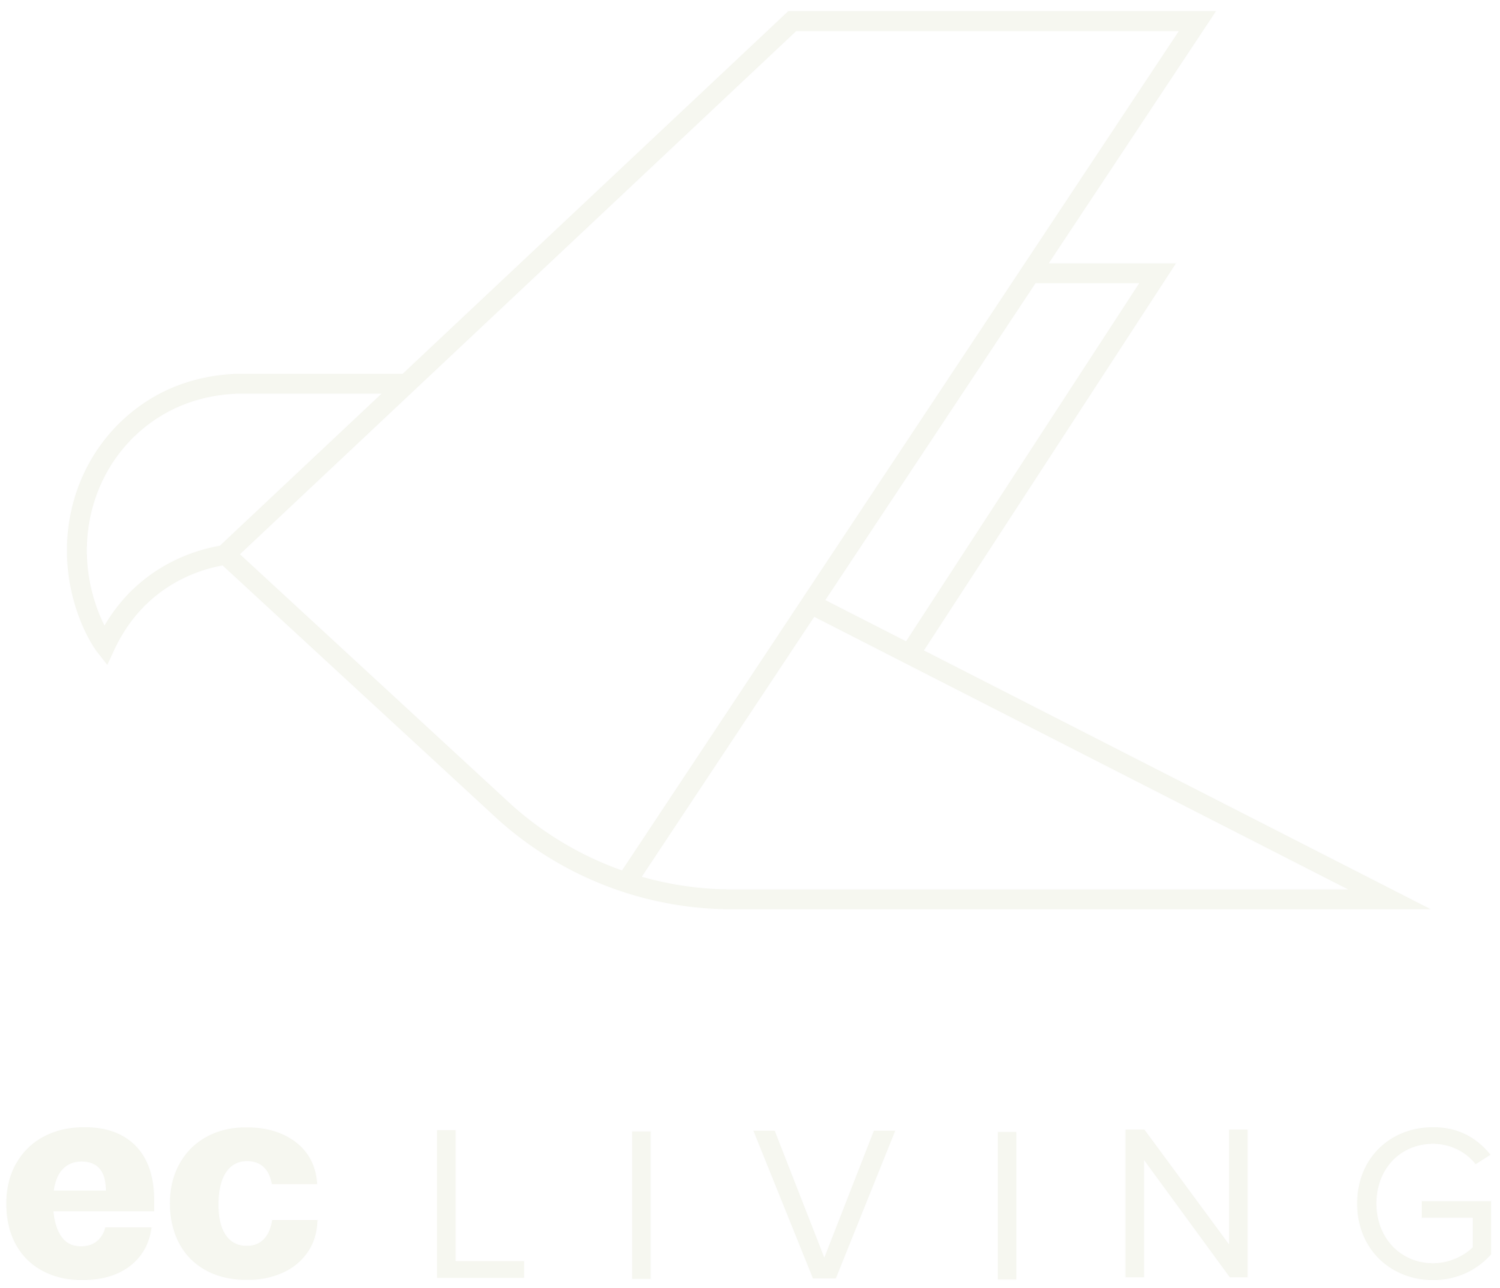 EC Living - Residential and commercial property sales and rentals.